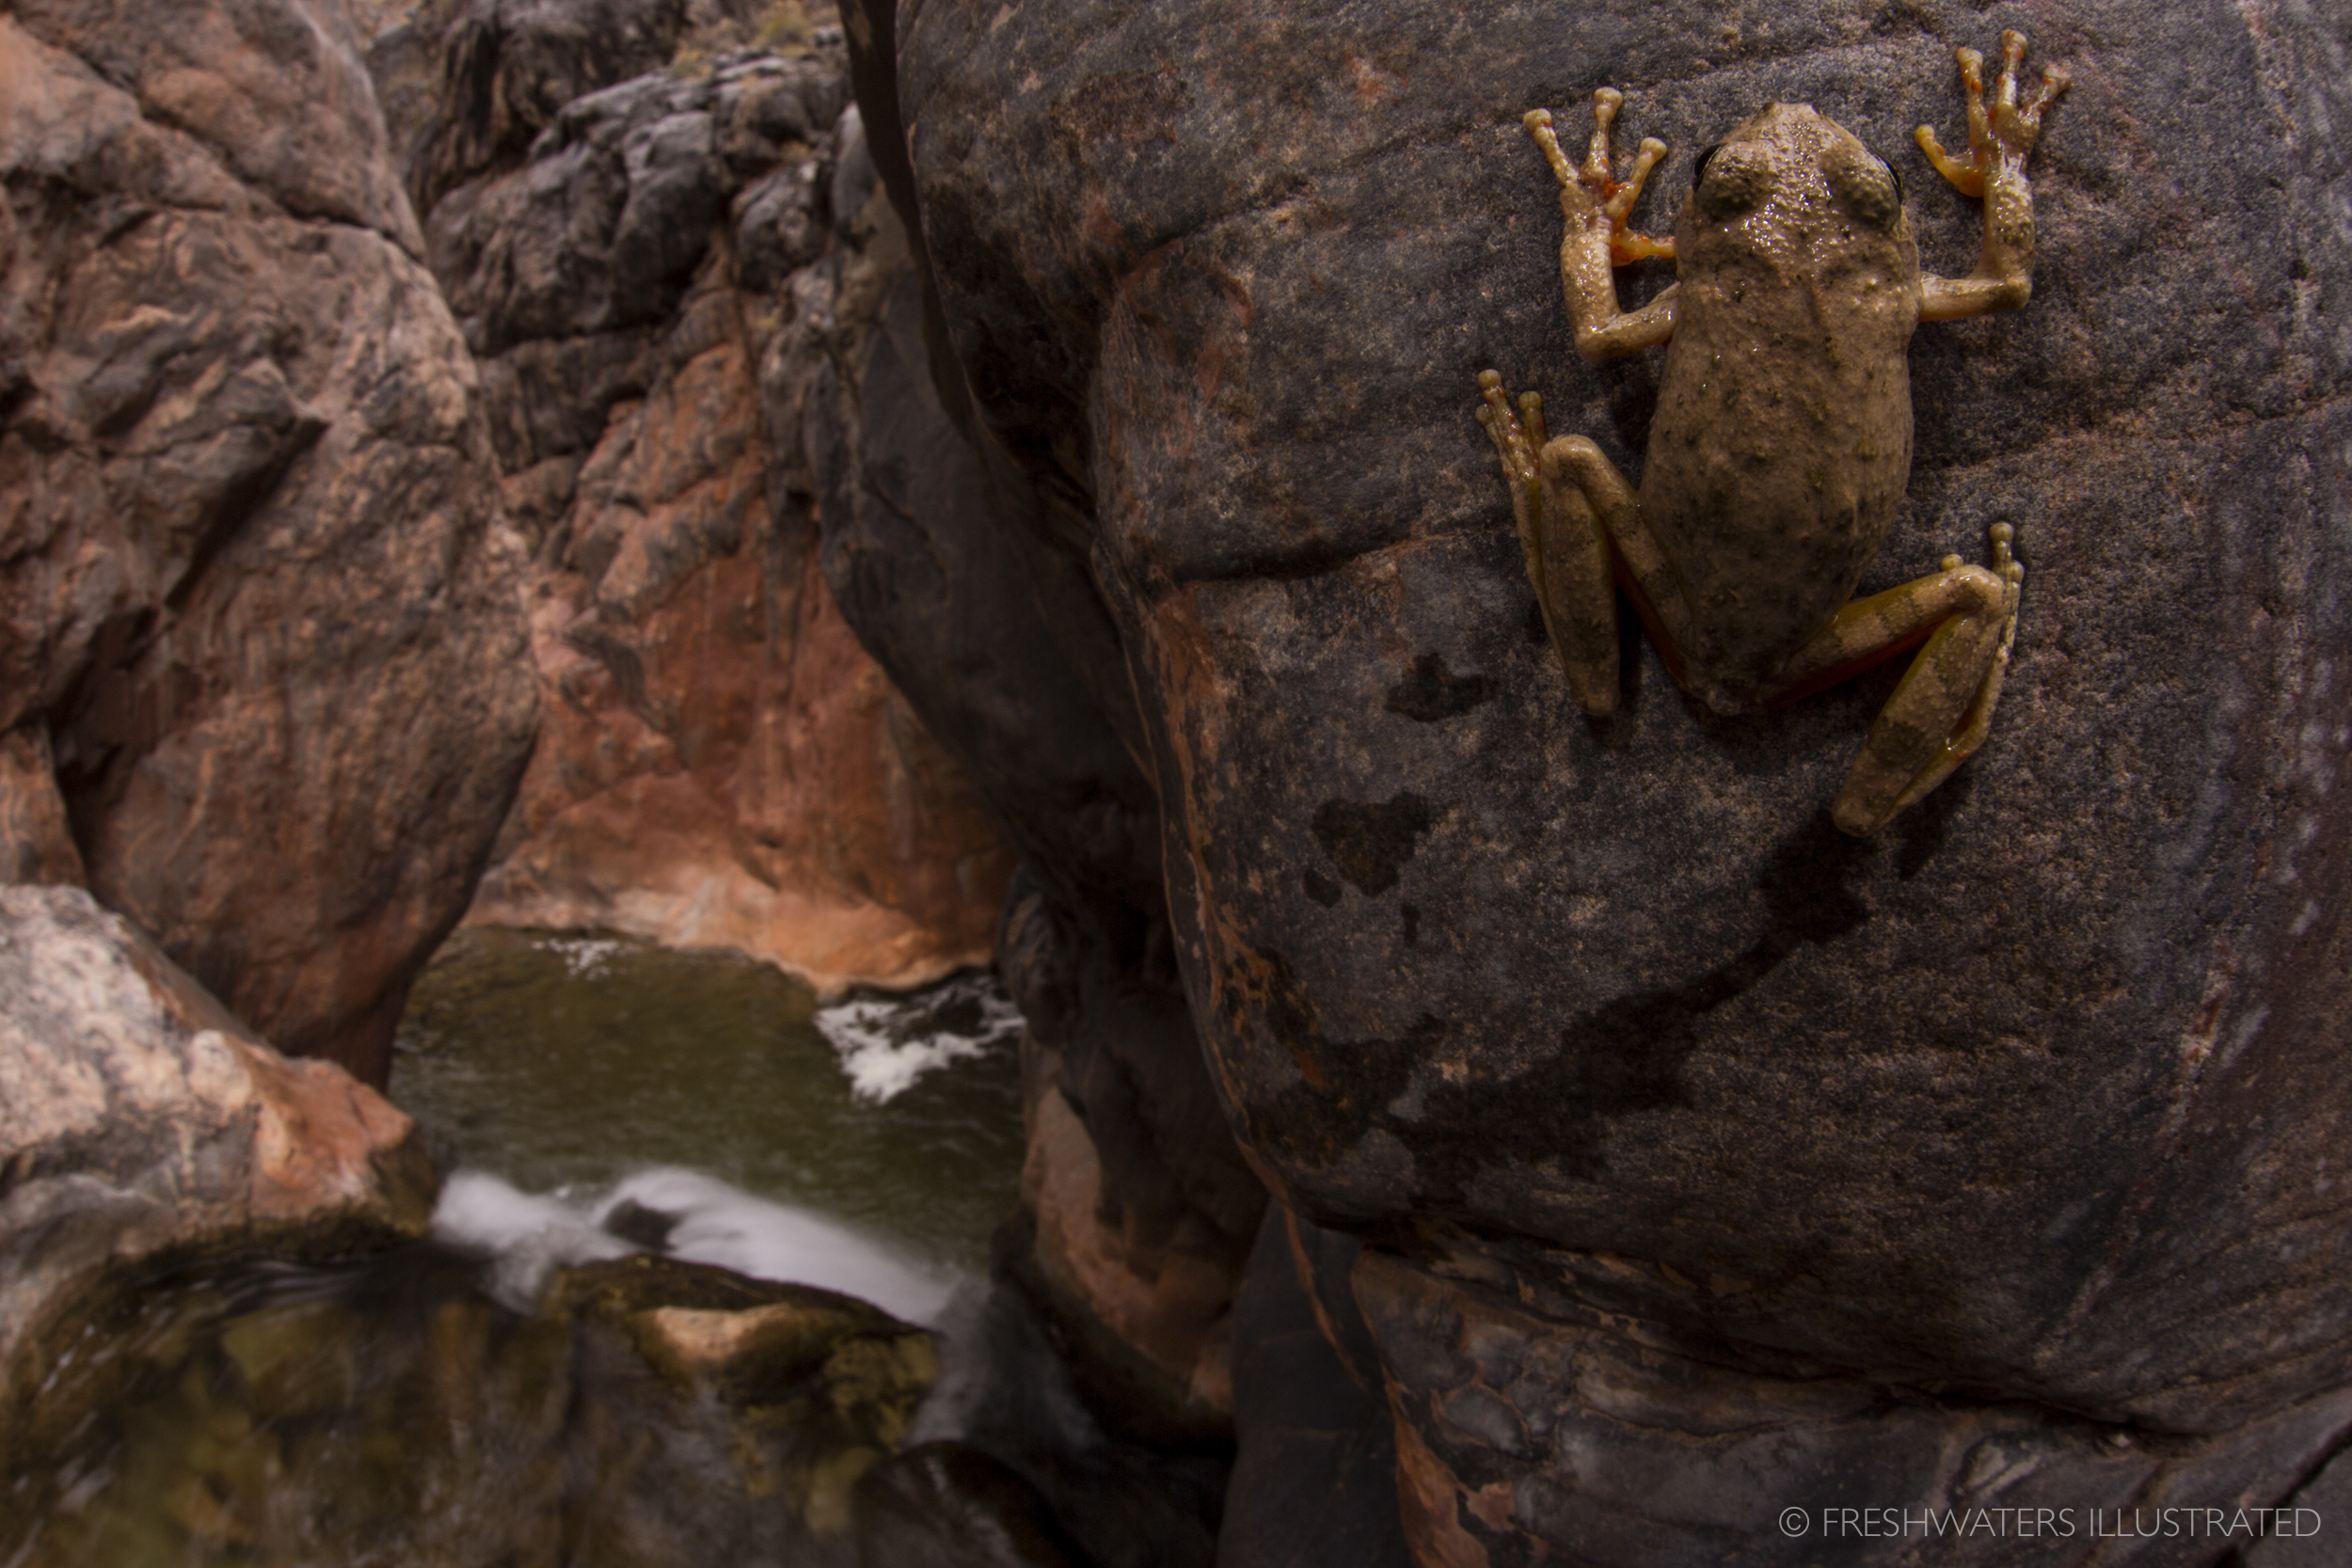  Canyon tree frog (Hyla arenicolor) Grand Canyon, Arizona  www.FreshwatersIllustrated.org   http://www.gcmrc.gov  